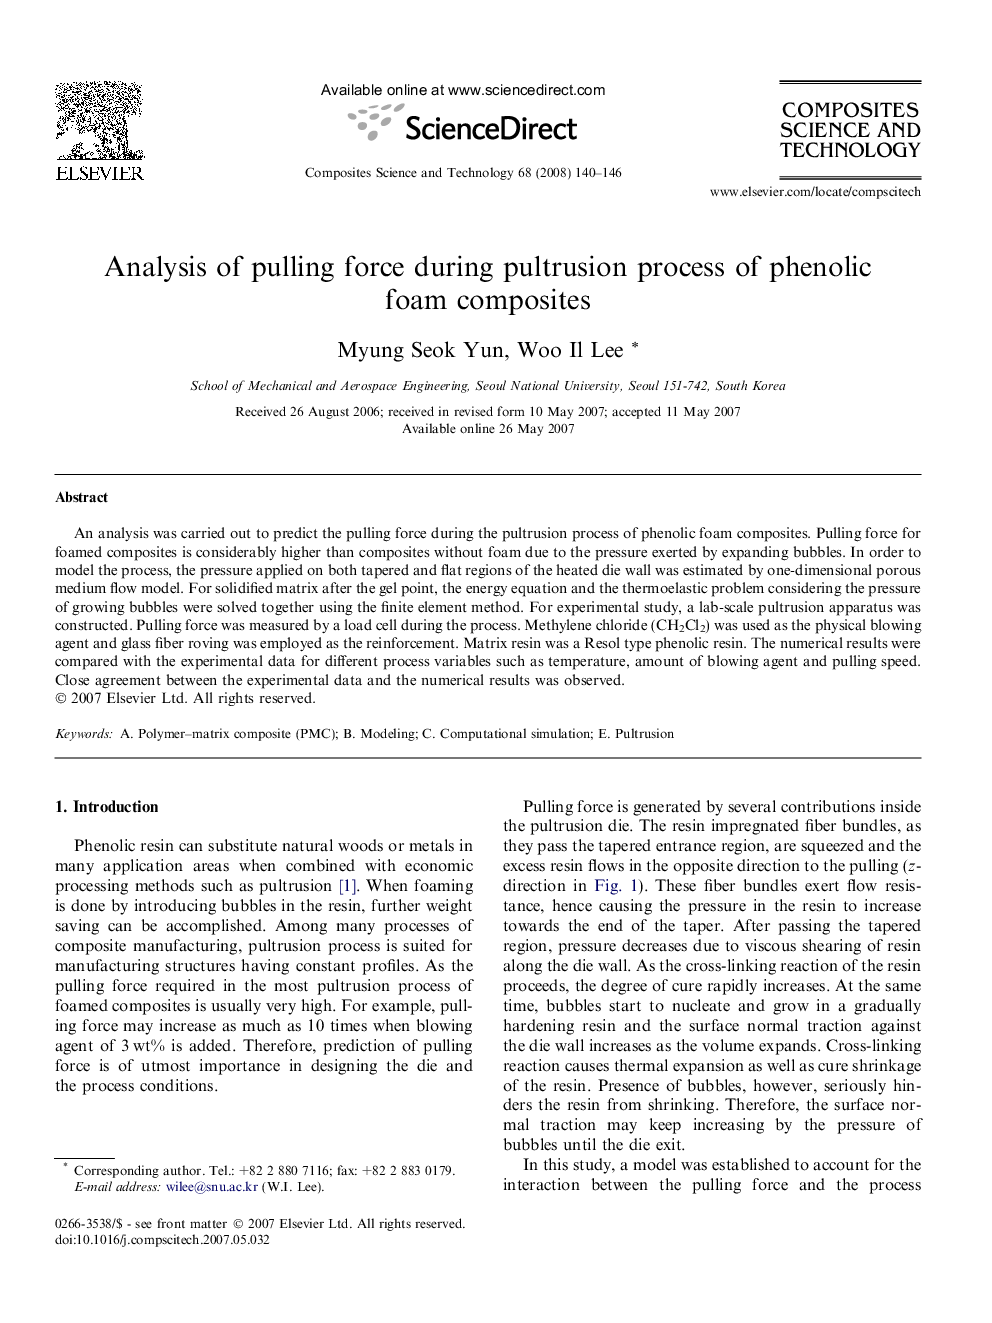 Analysis of pulling force during pultrusion process of phenolic foam composites